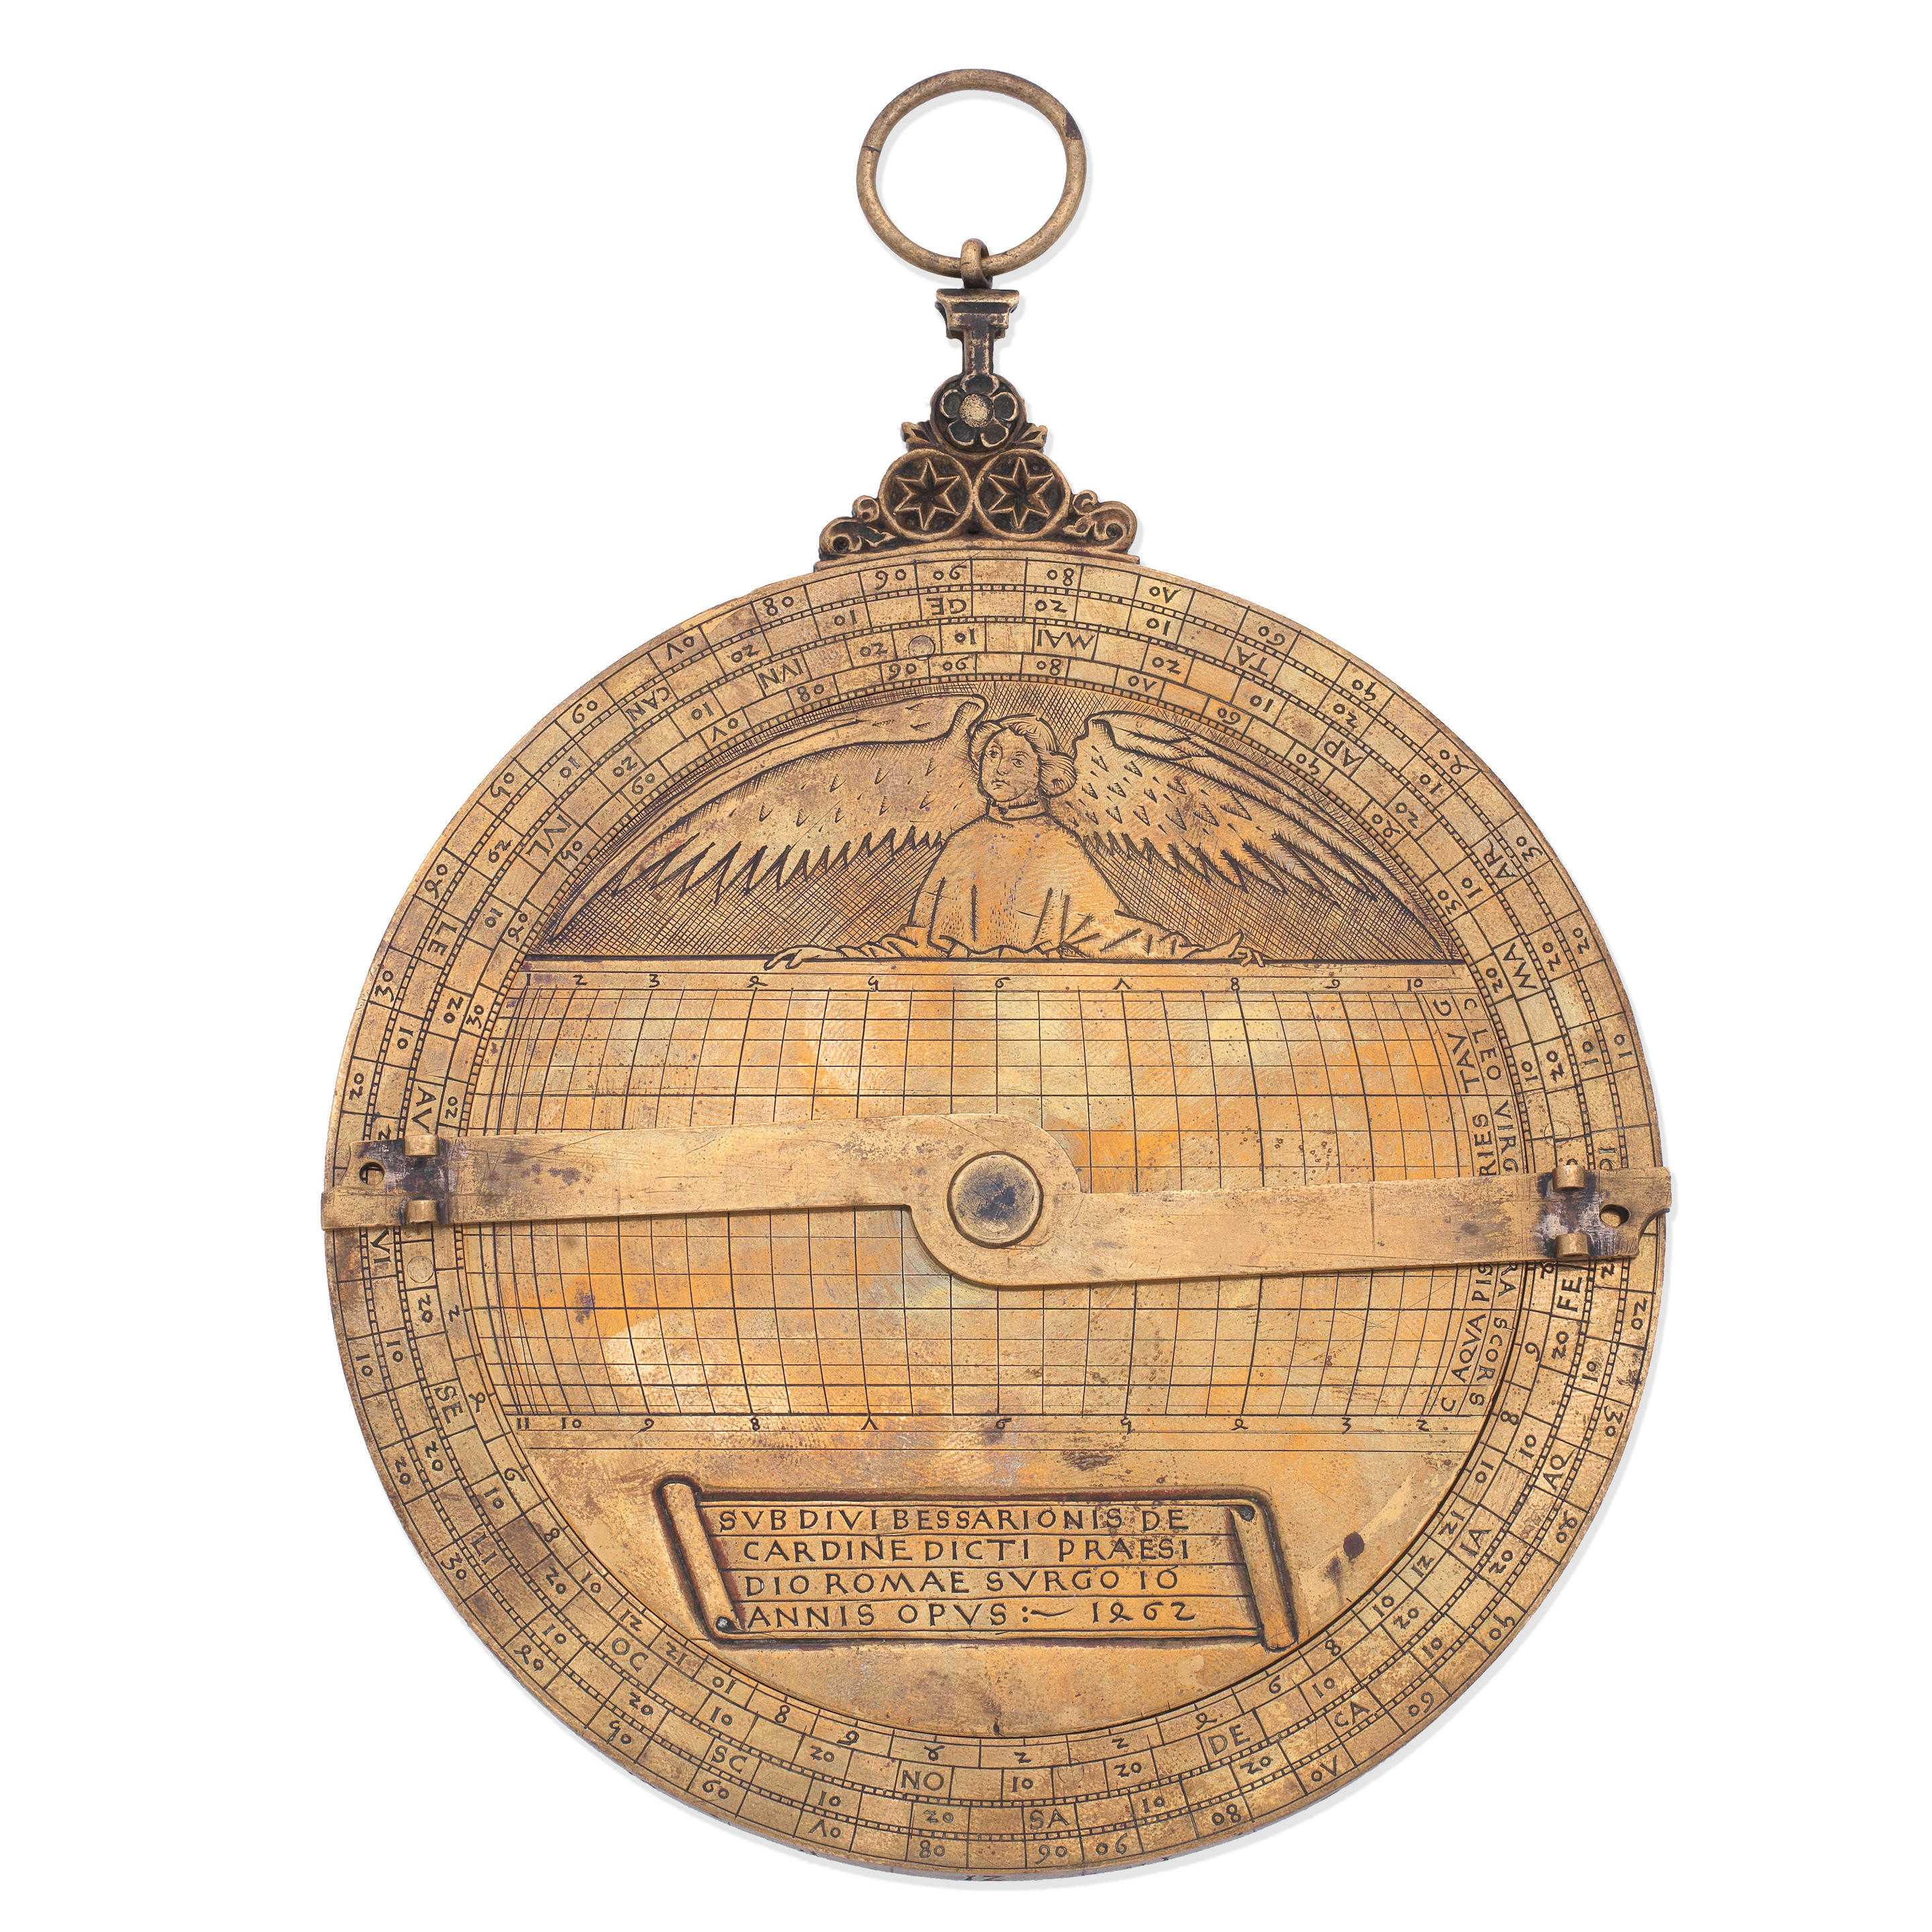 Detail of a 15th-century astrolabe that sold for £400,000 ($638,645 with buyer's premium) at Bonhams.